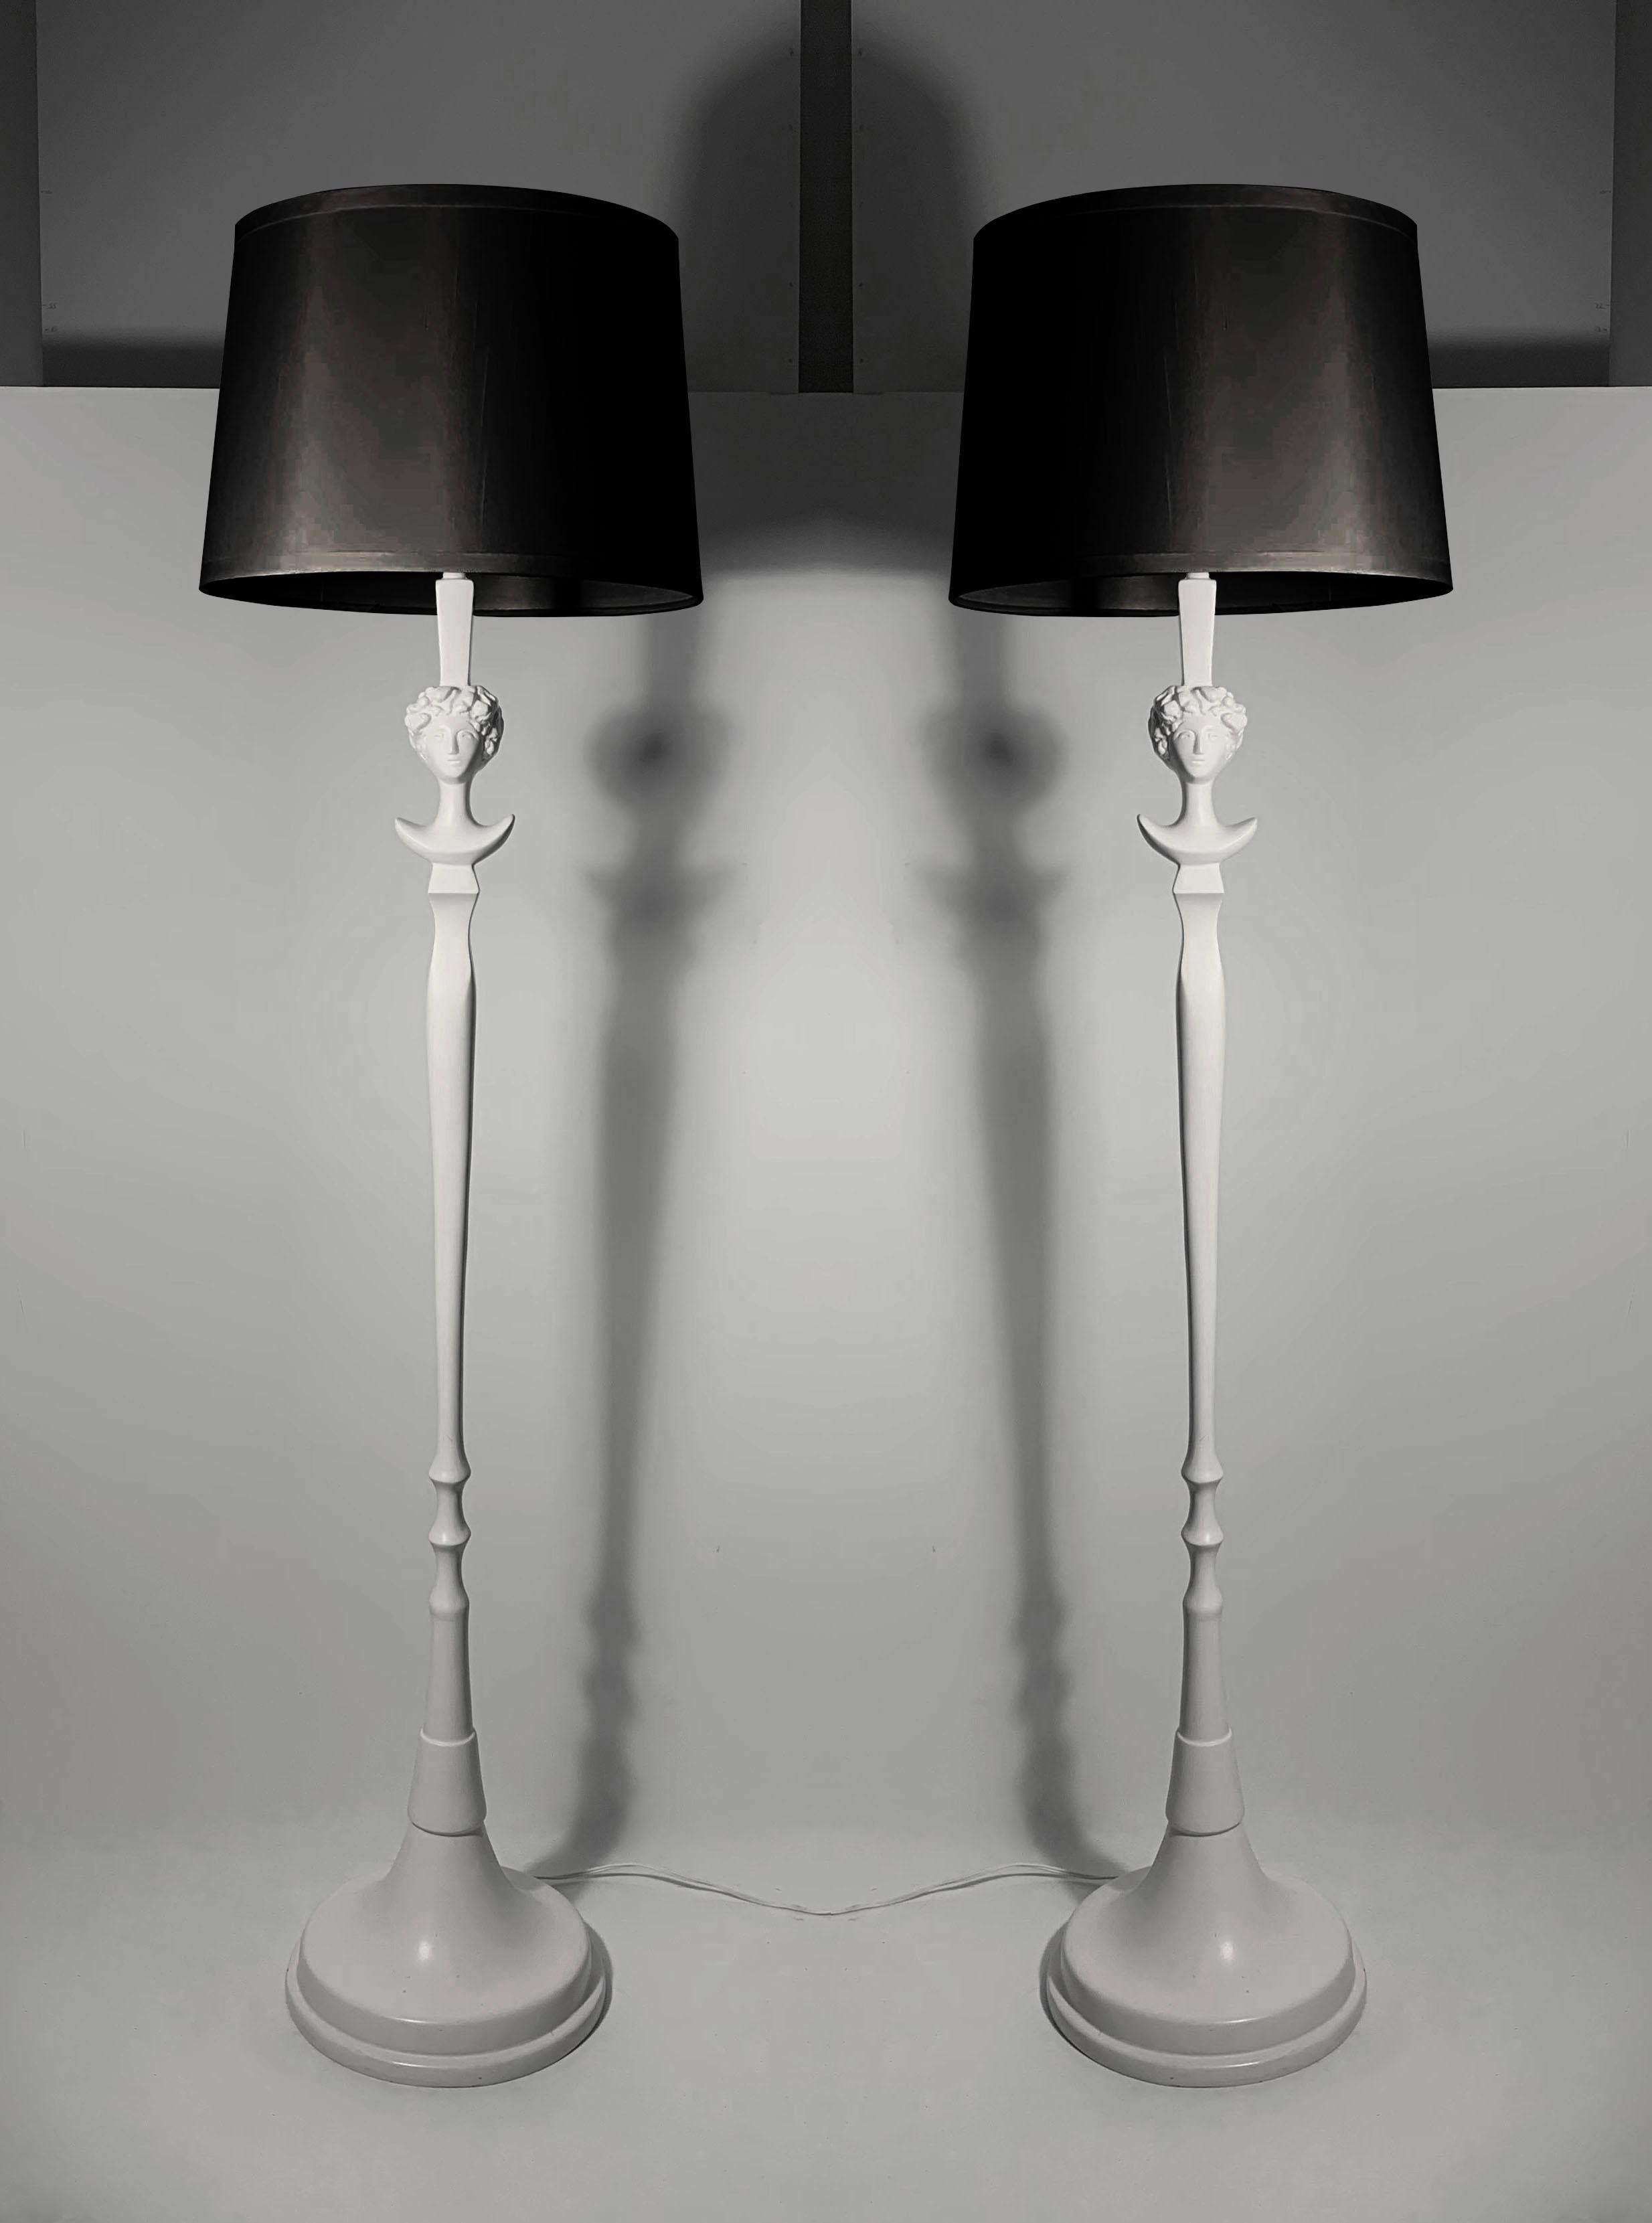 Pair of Plaster Tete De Femme floor lamps by Sirmos after Giacometti

Measure: 62